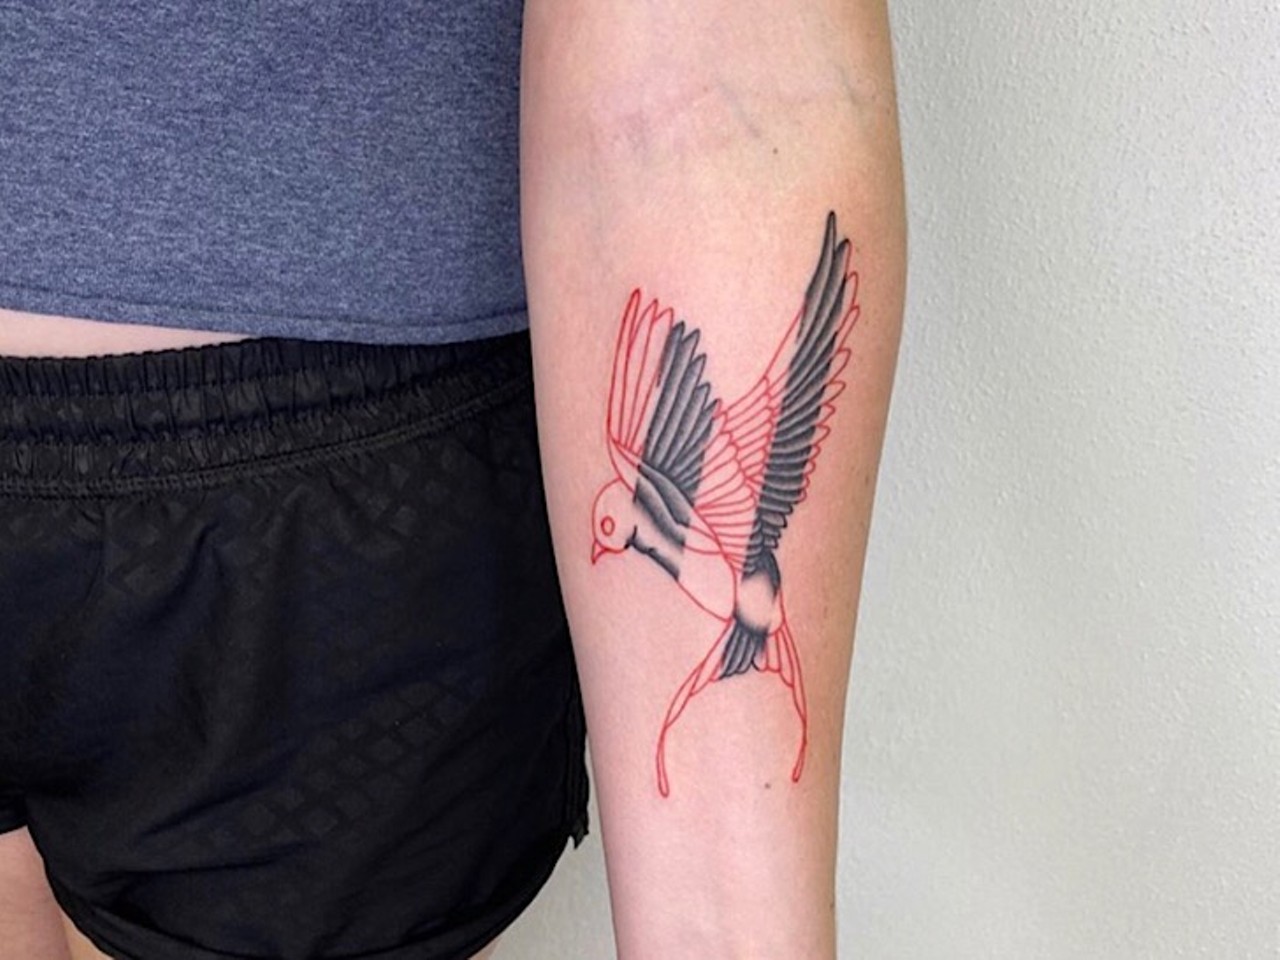 20 Tampa Bay tattoo artists you should be following on Instagram, Tampa